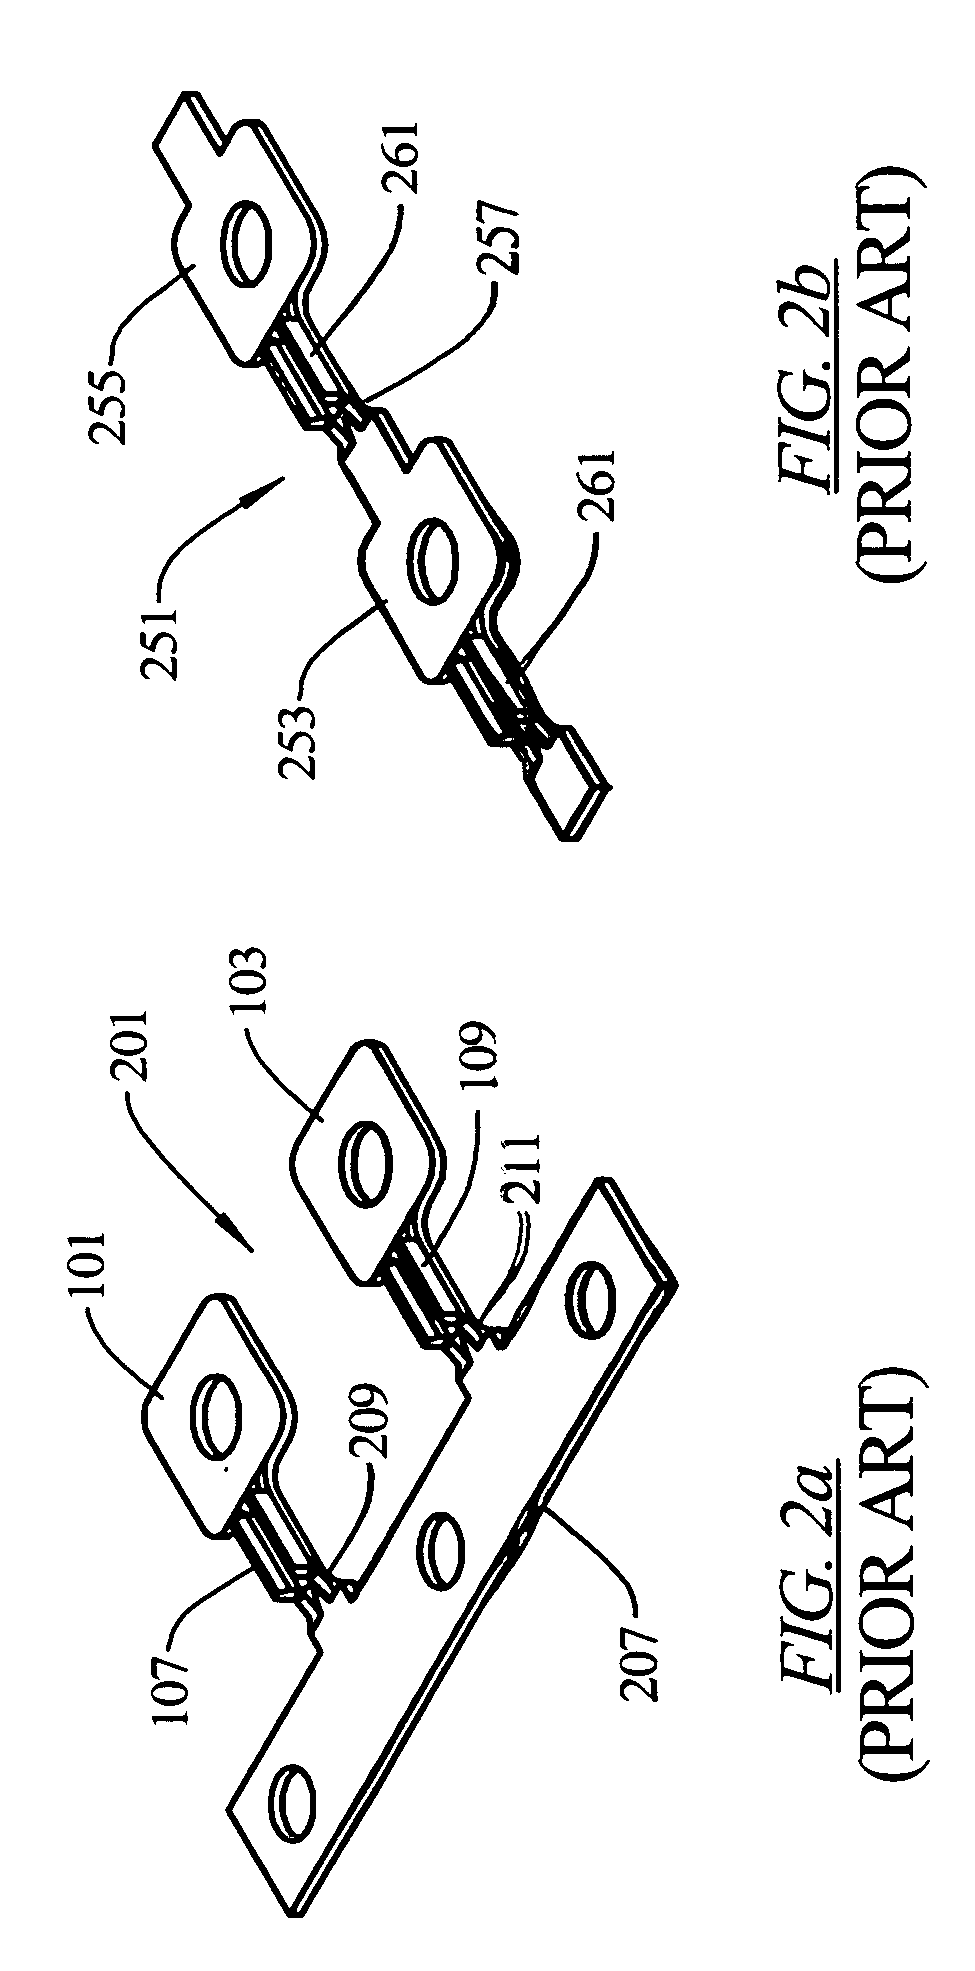 Self-locking wire terminal and shape memory wire termination system